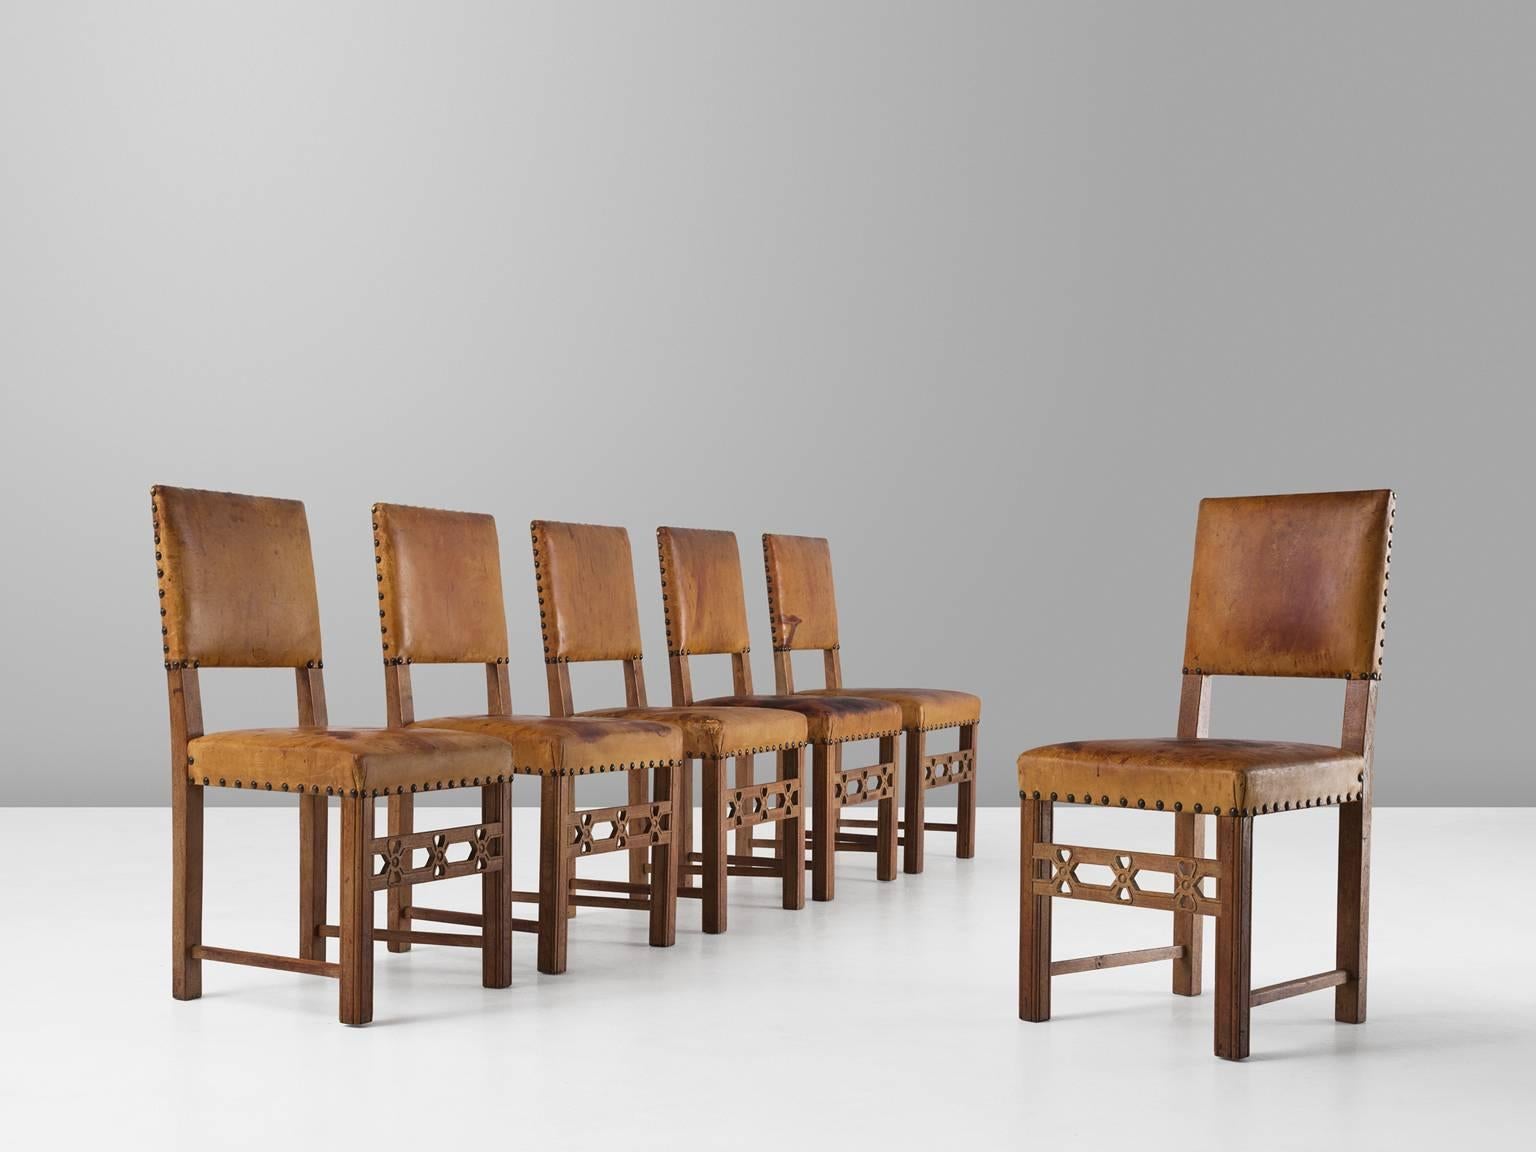 Set of six dining chairs, in oak and leather, Sweden, 1940s.

Set of six elegant dining chairs in oak and expressive patinated cognac leather. These chairs have a straight and simplistic design. Elegant details make these chairs into the unique